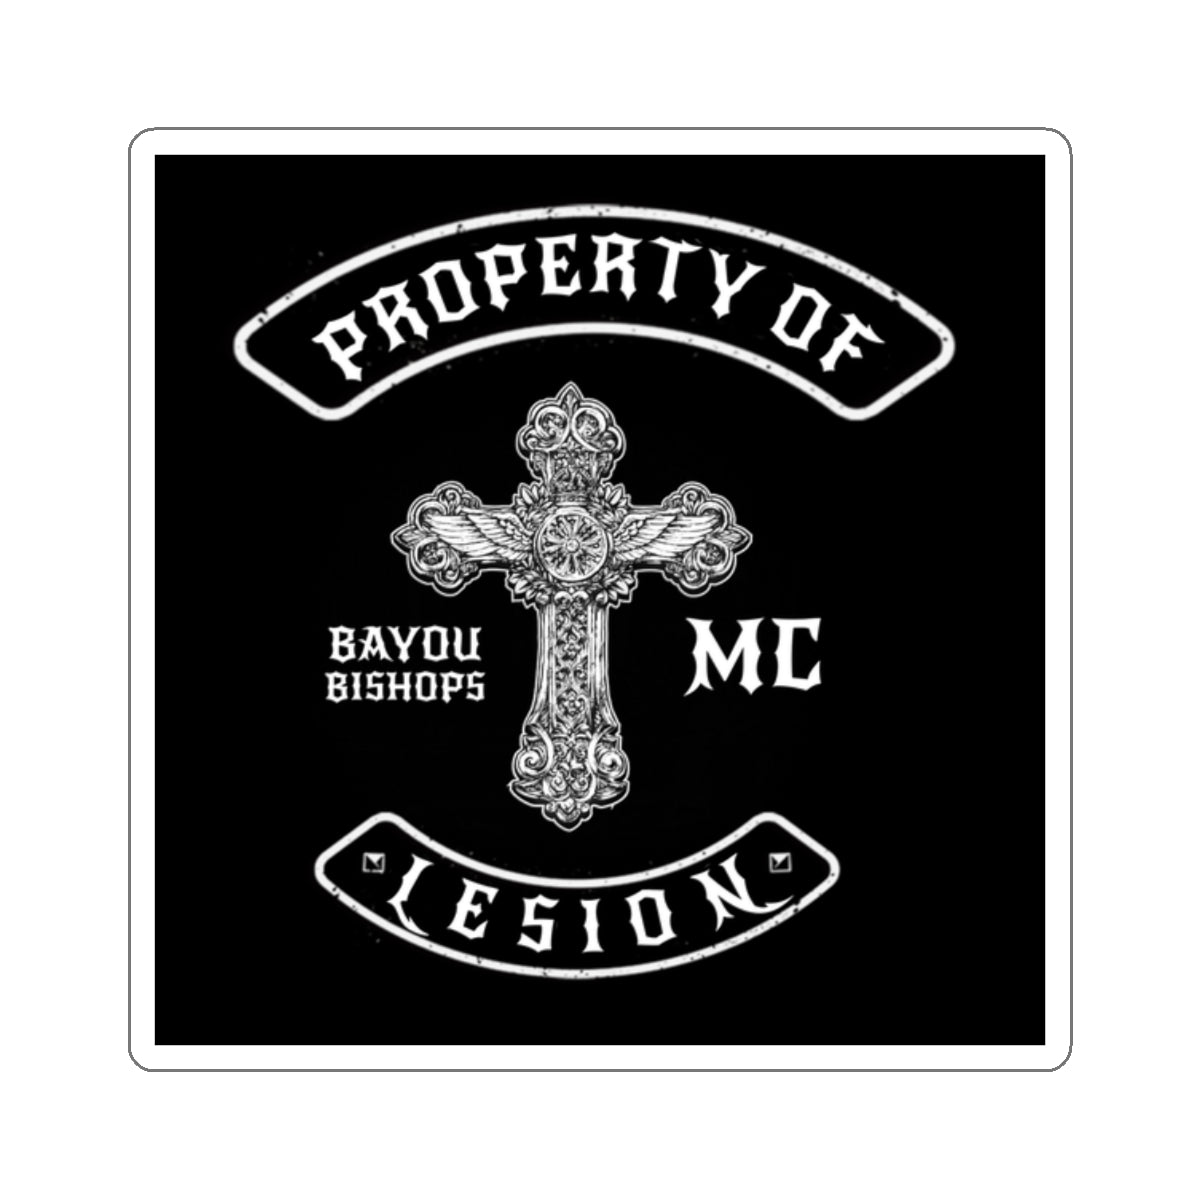 PROPERTY OF LESION STICKER